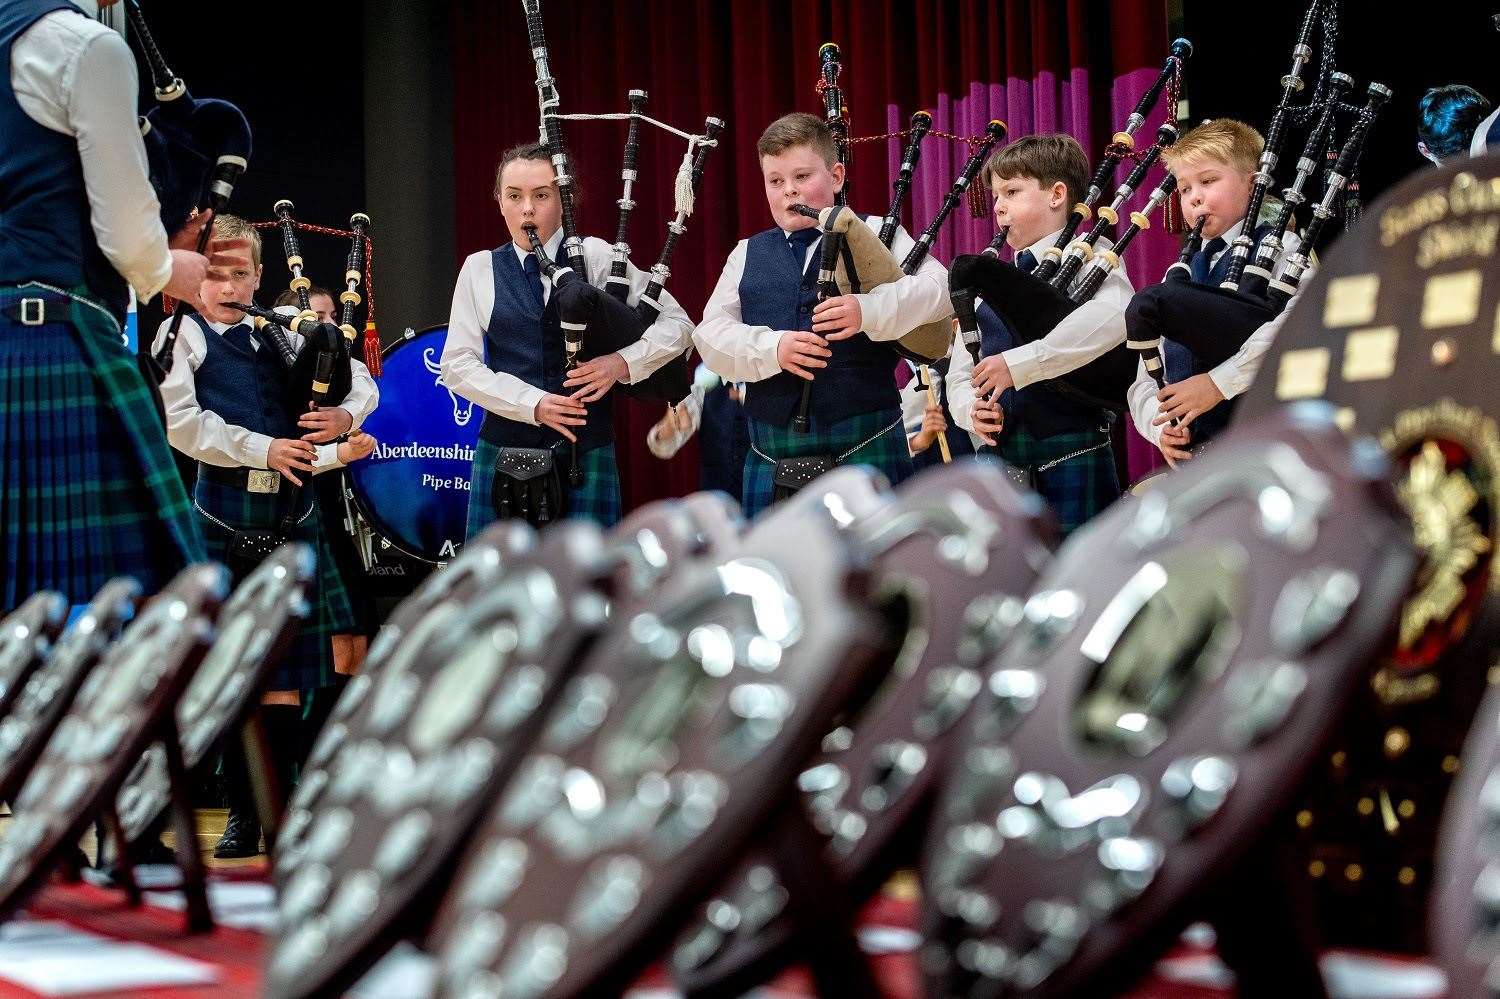 School pupils will take centre stage at national pipe band event after a two-year absence.